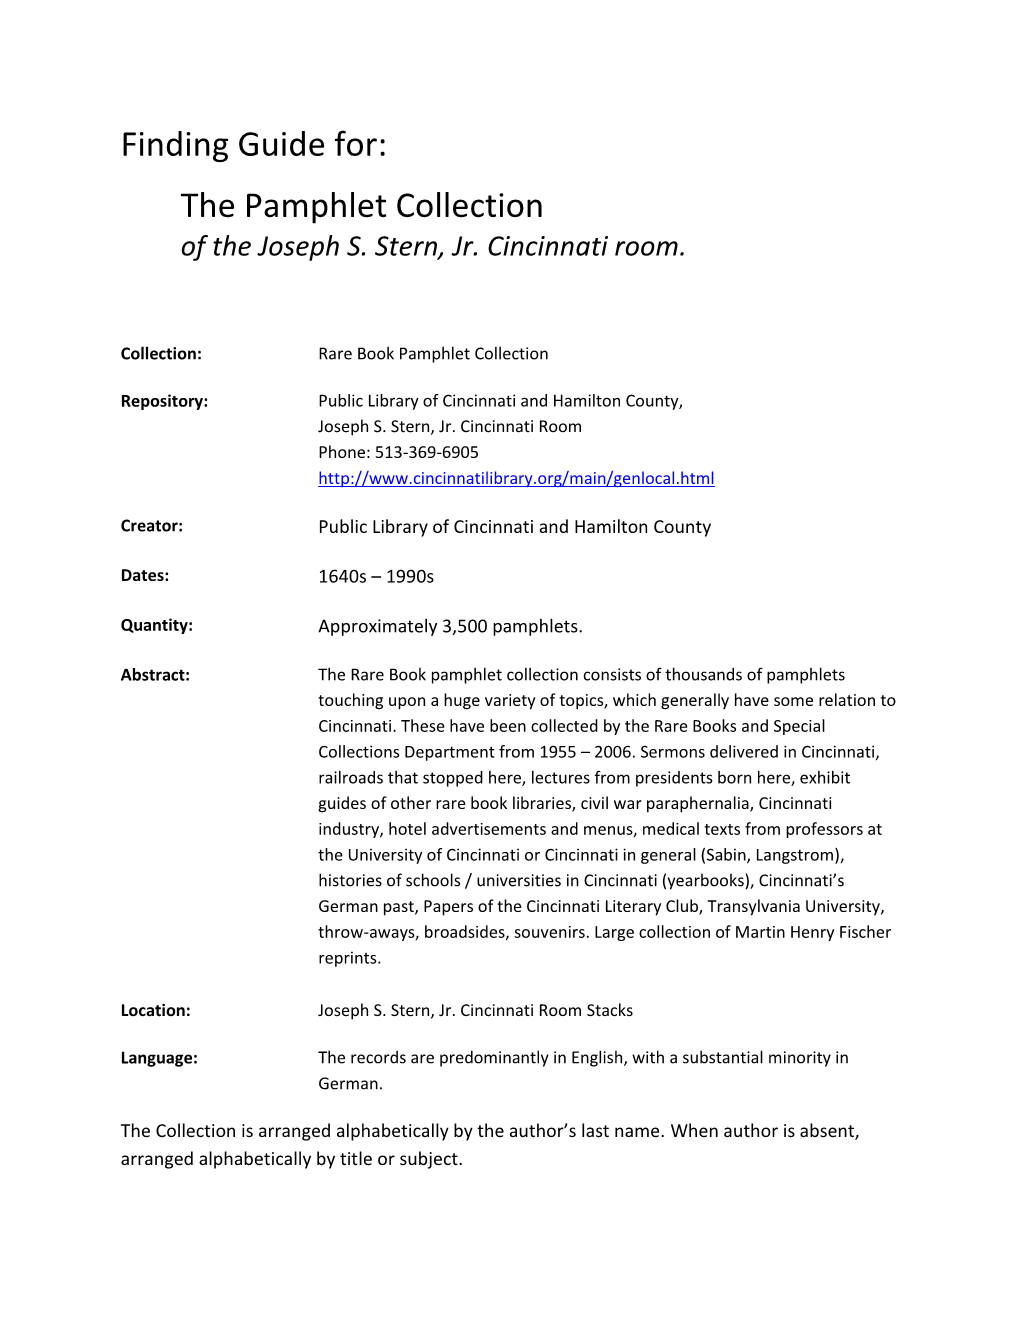 Finding Guide For: the Pamphlet Collection of the Joseph S